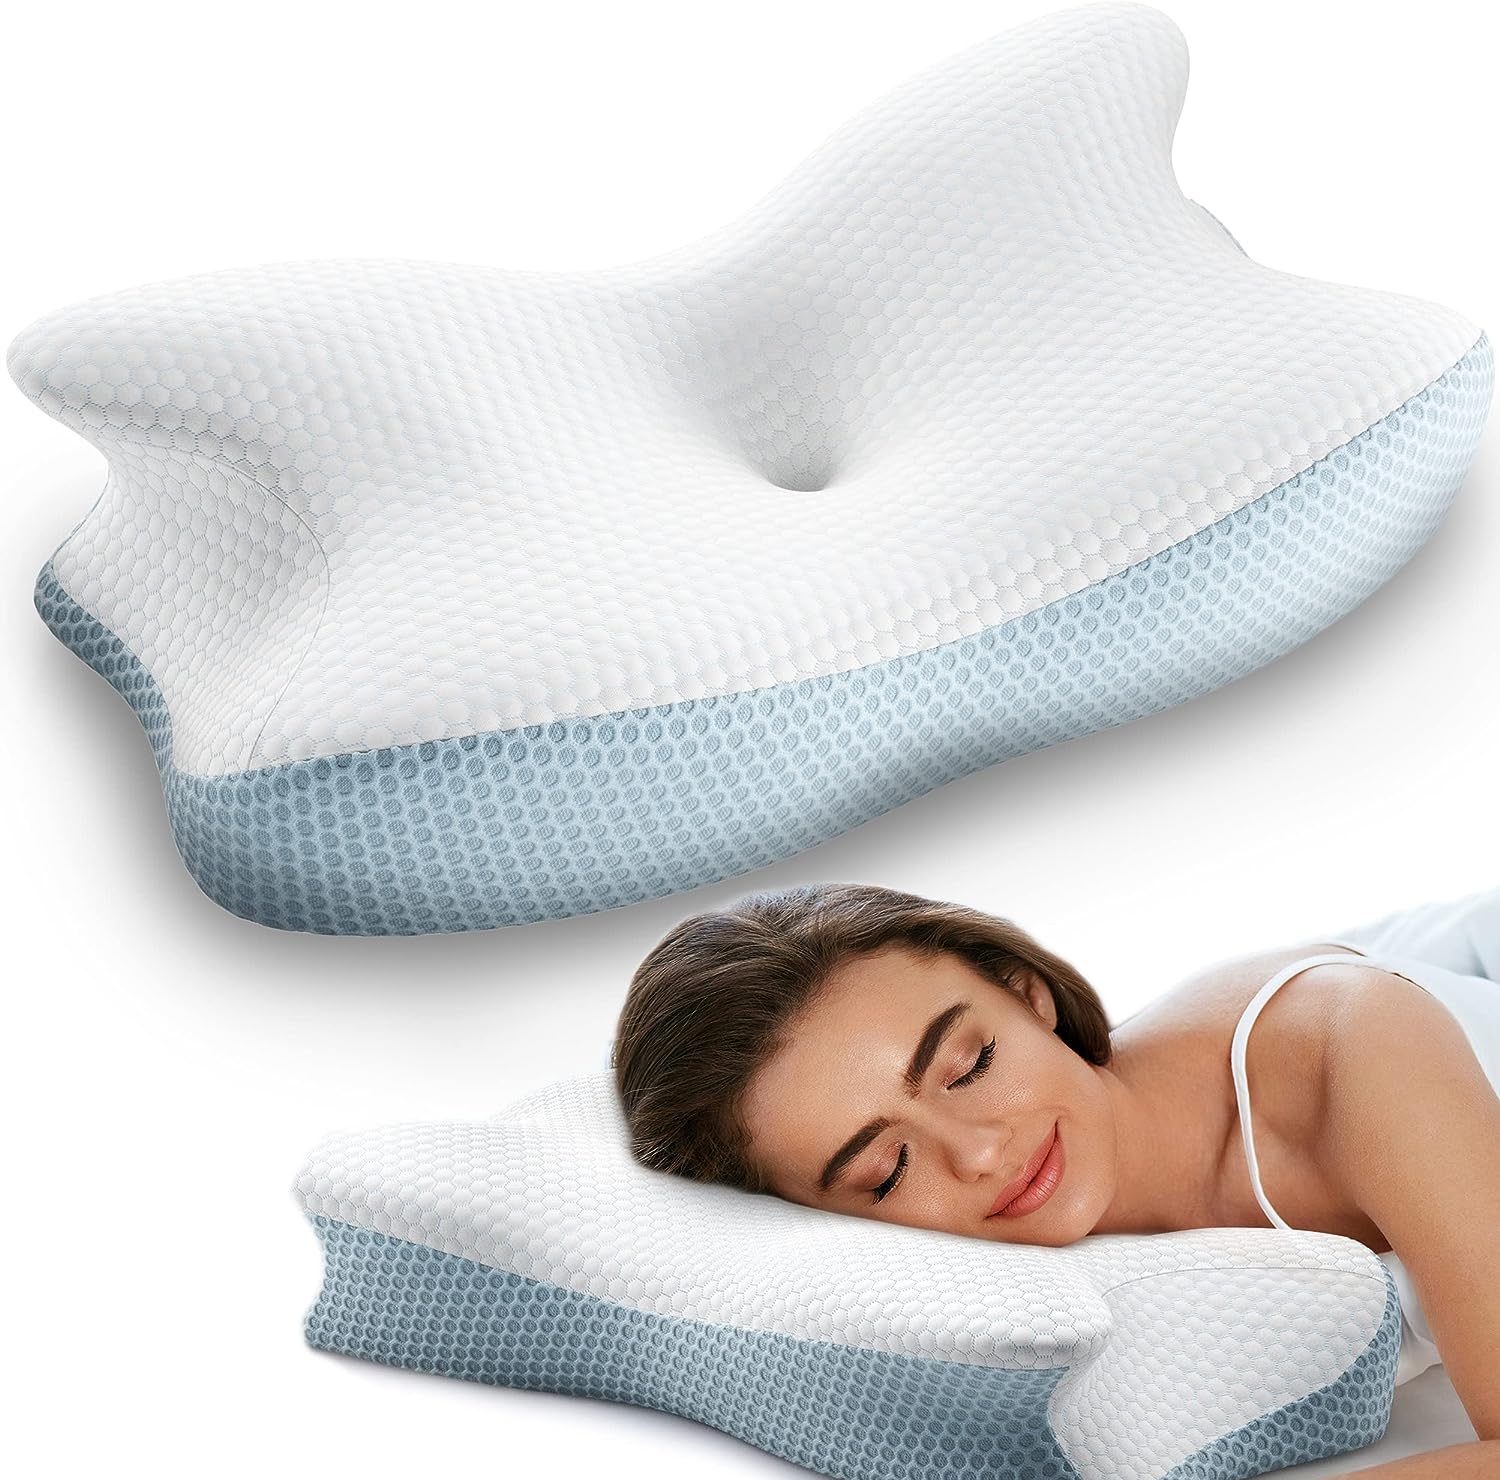 DREAMSIR SETORE Extra Firm Pillows for Sleeping,Neck Support